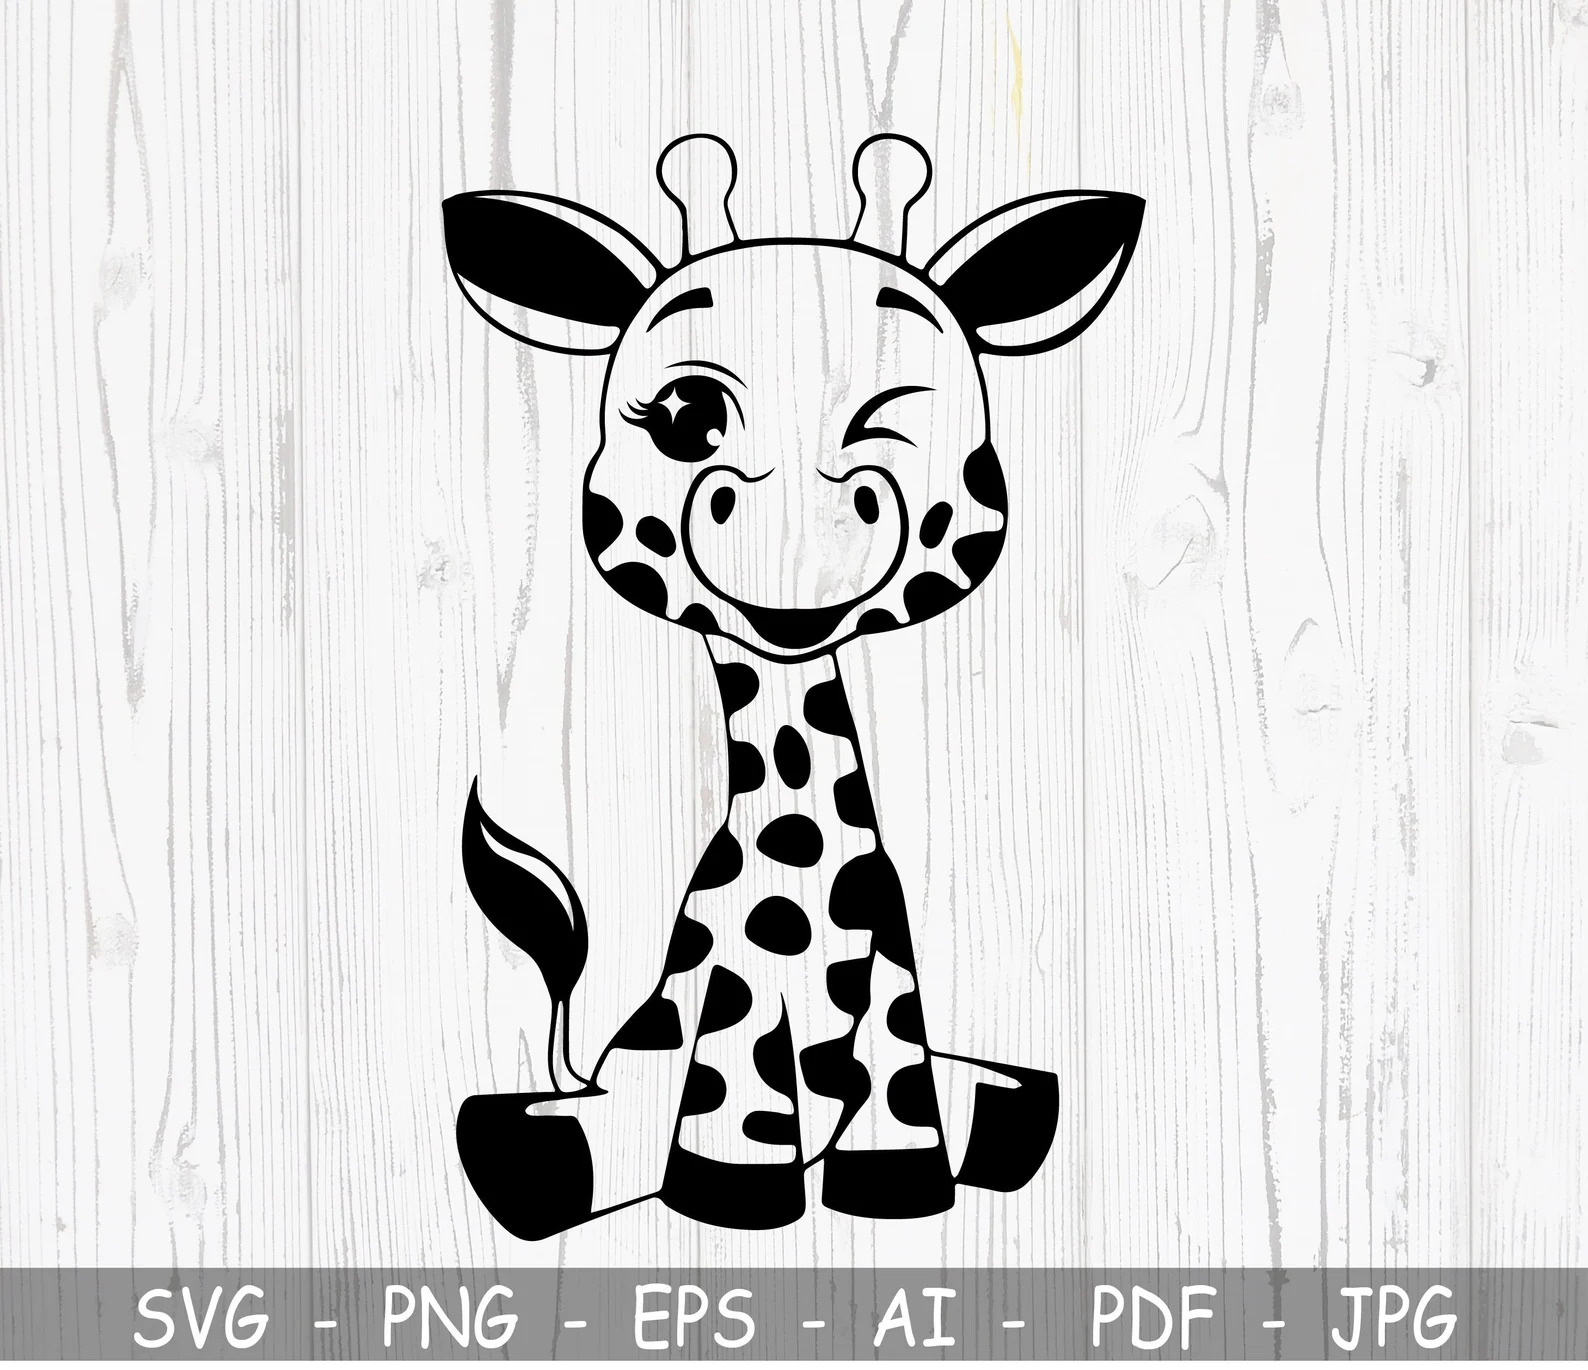 Black and white giraffe sitting on top of a wooden floor.